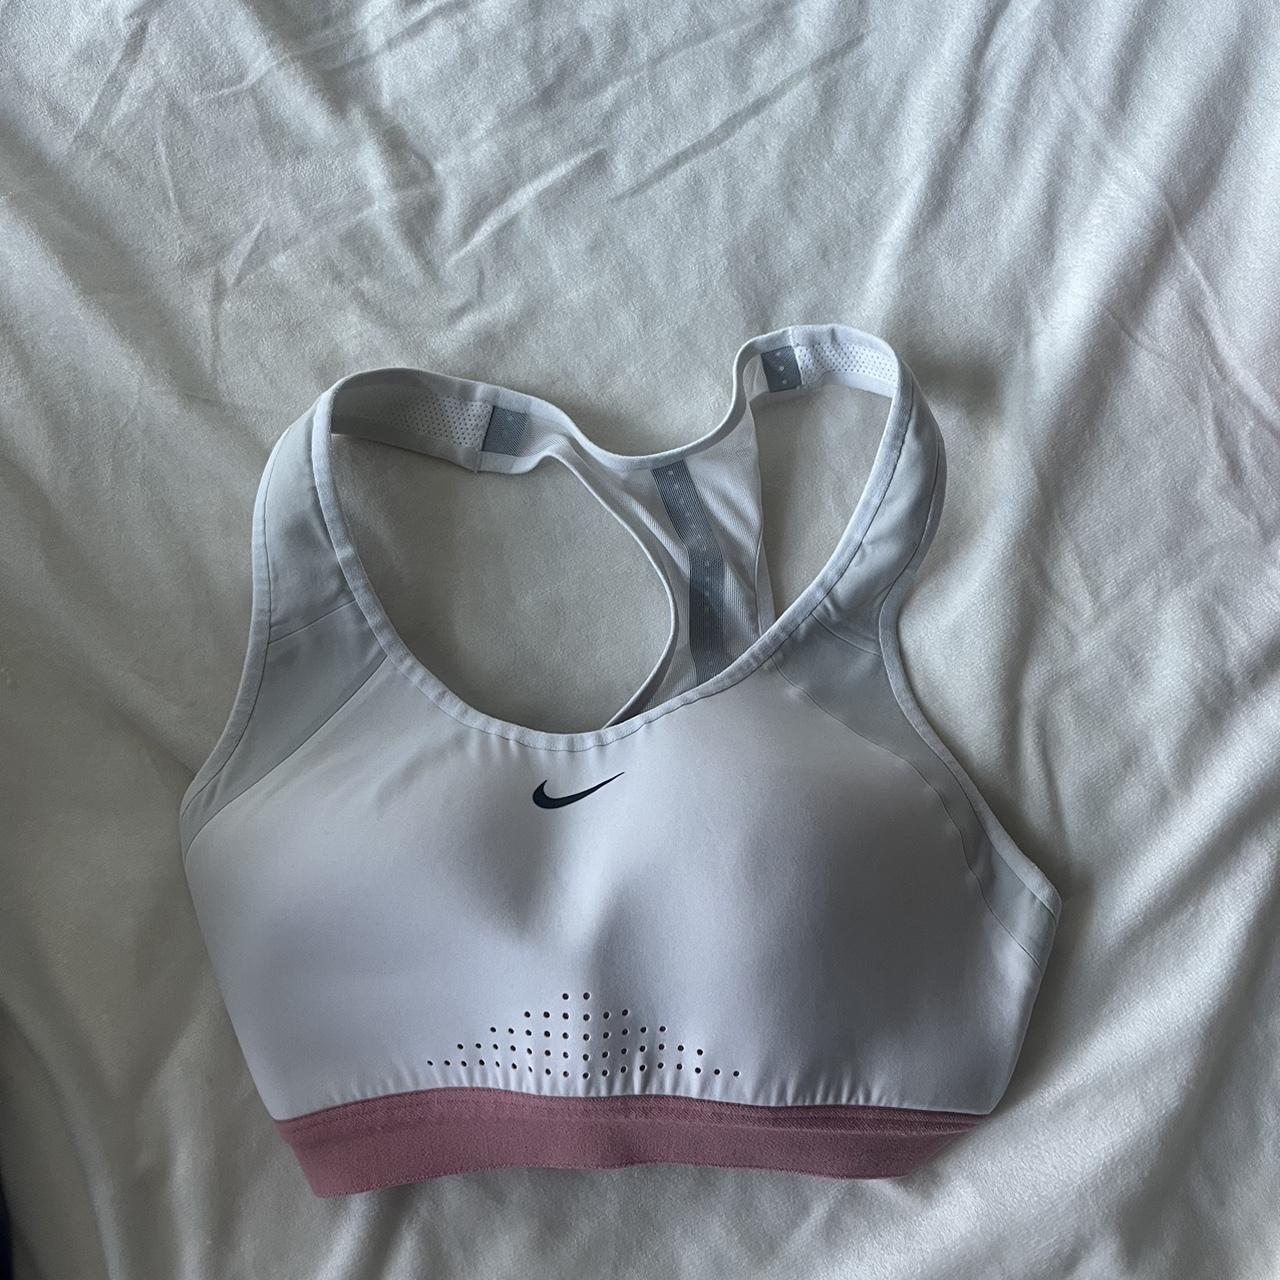 Nike Women's Pink and White Top | Depop